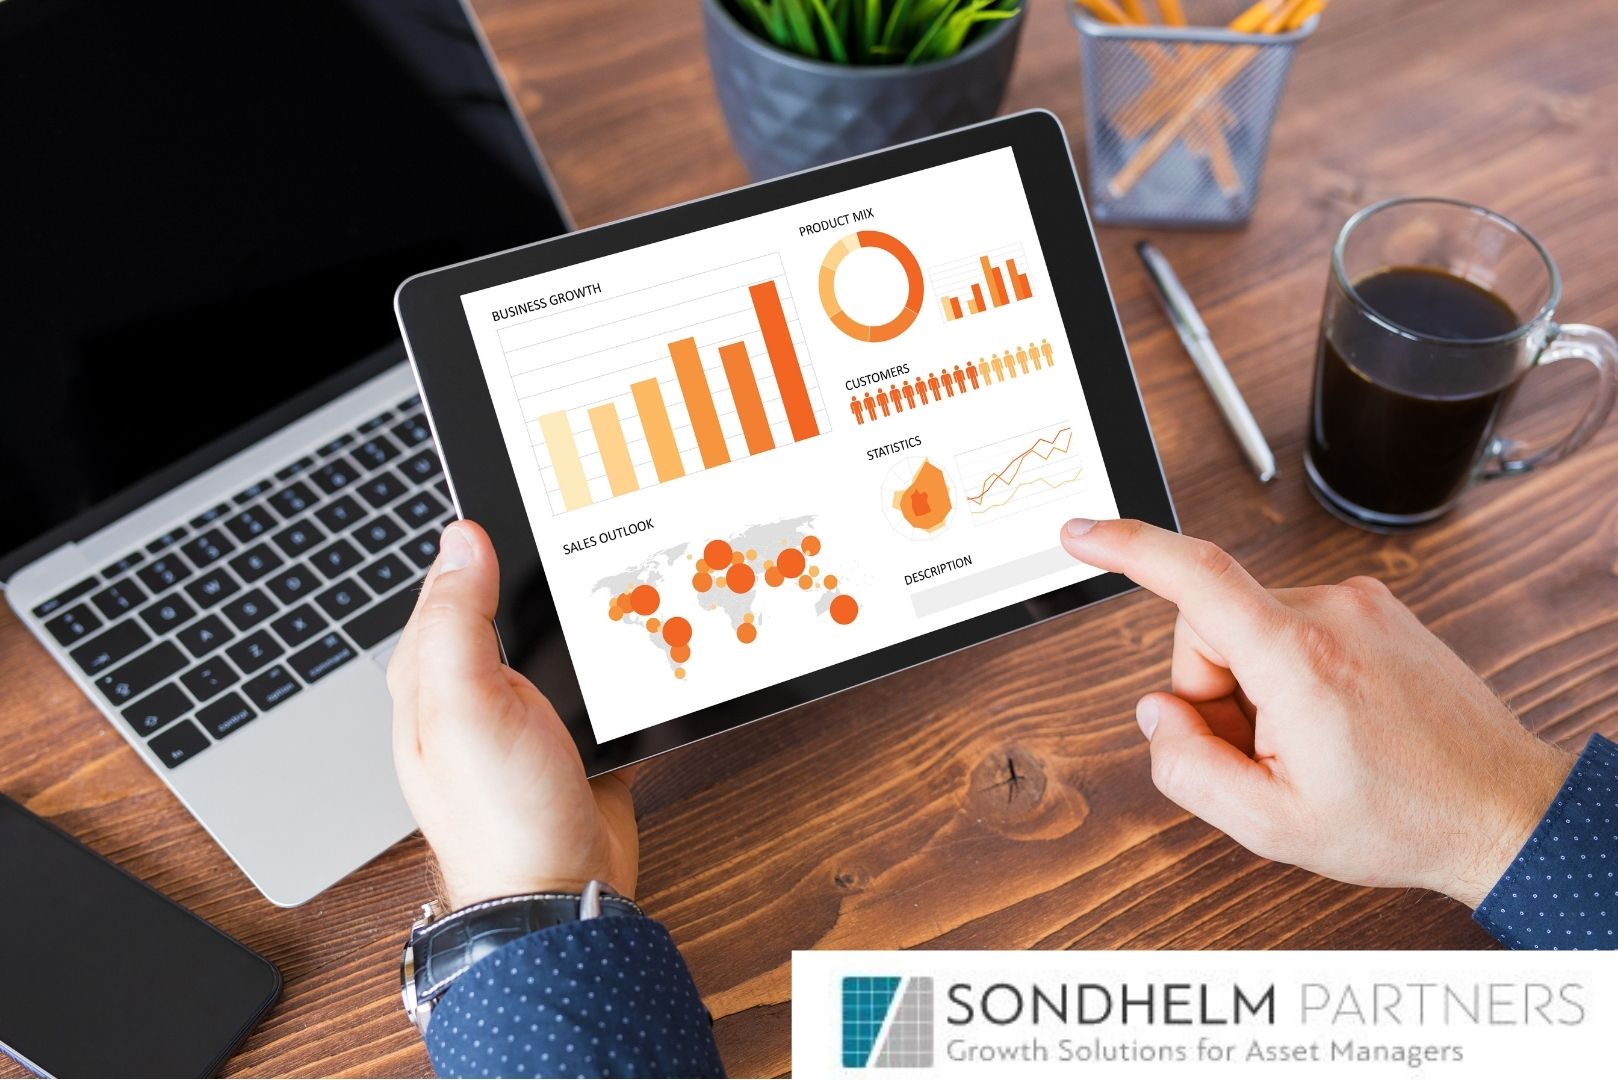 sondhelm partners logo and interacting with graphs on ipad